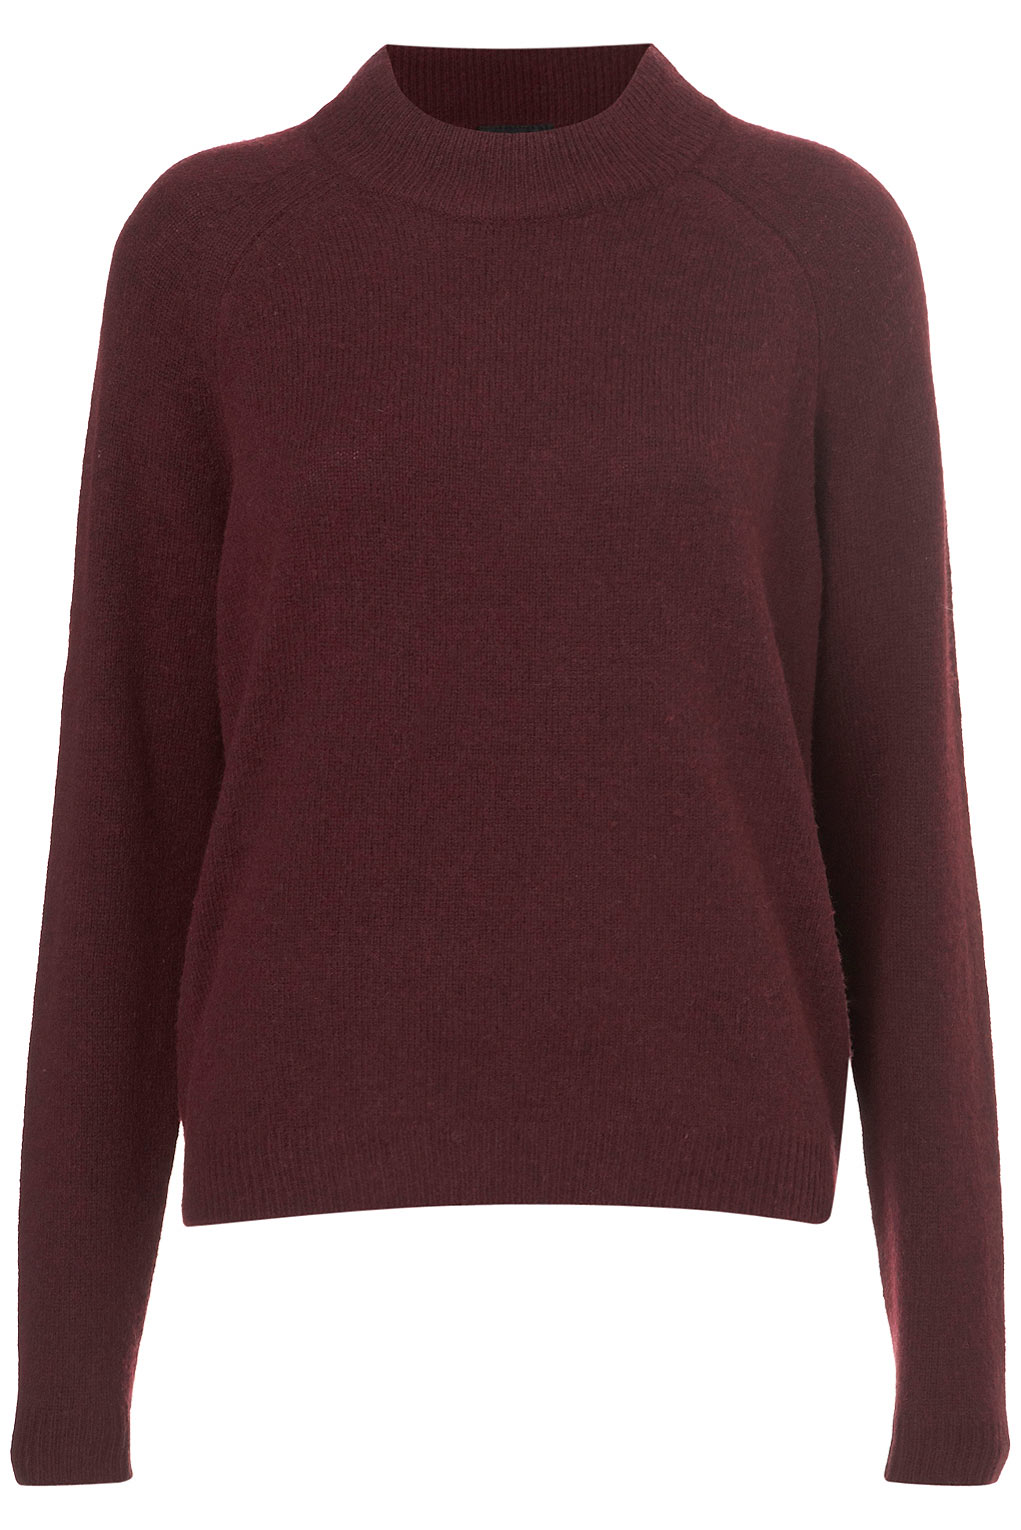 Topshop Knitted Zip High Neck Jumper in Red | Lyst